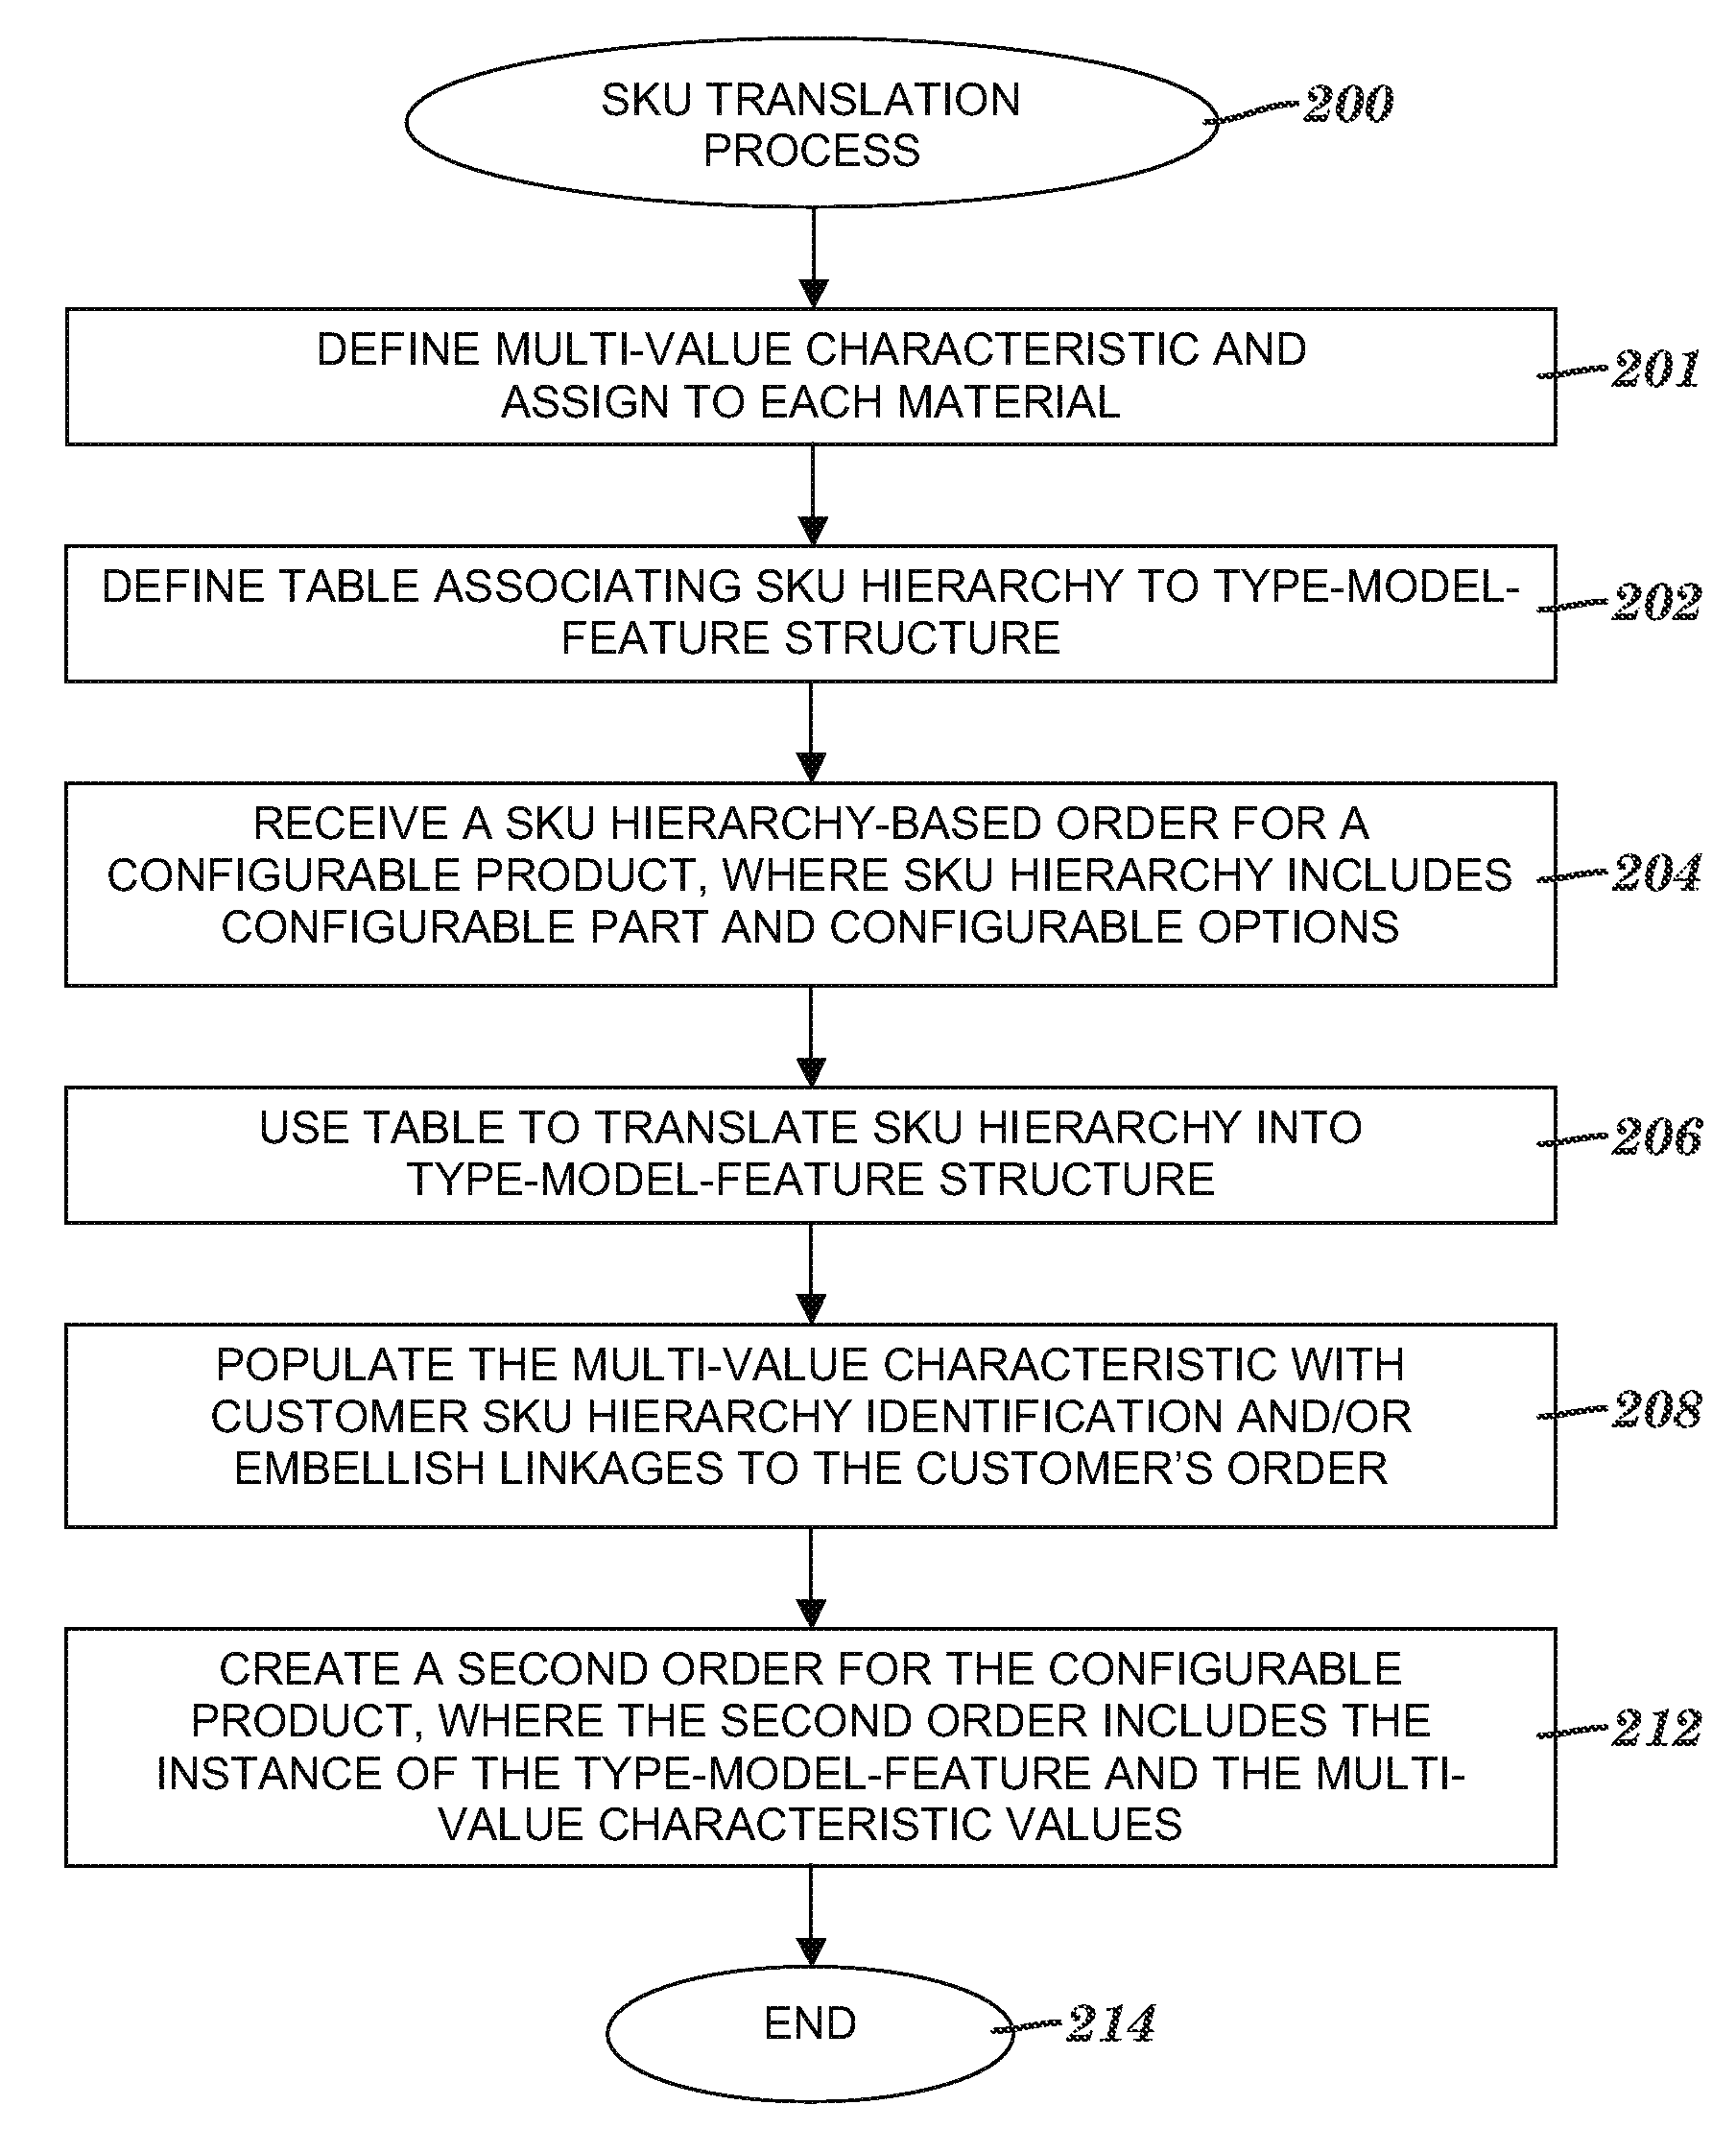 Translating an order's stock keeping unit hierarchy to an order fulfillment structure